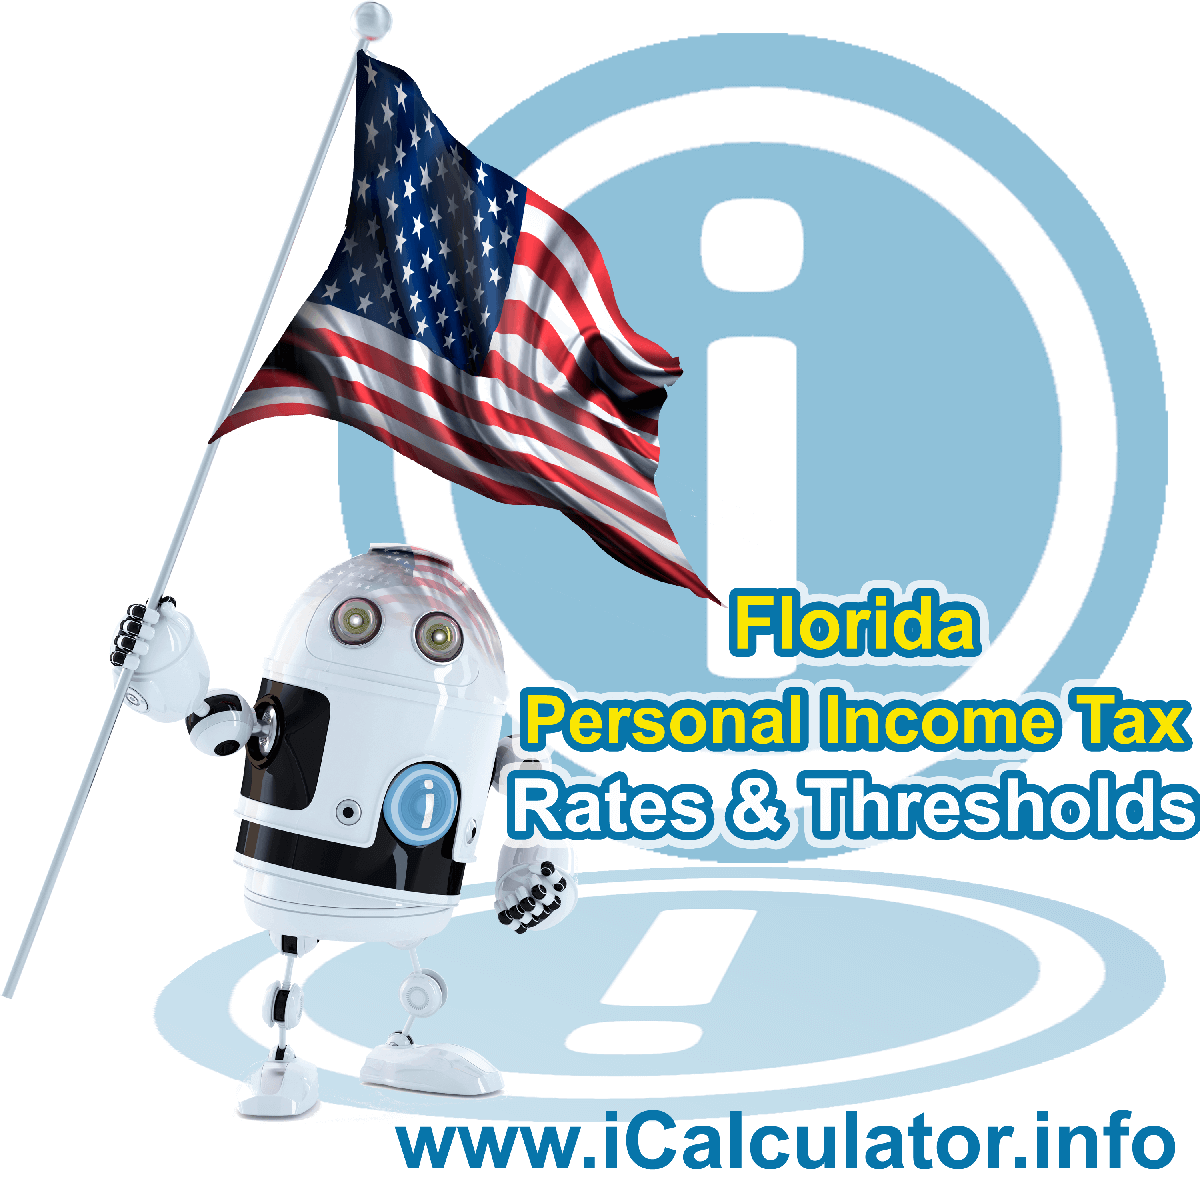 Florida State Tax Tables 2016. This image displays details of the Florida State Tax Tables for the 2016 tax return year which is provided in support of the 2016 US Tax Calculator